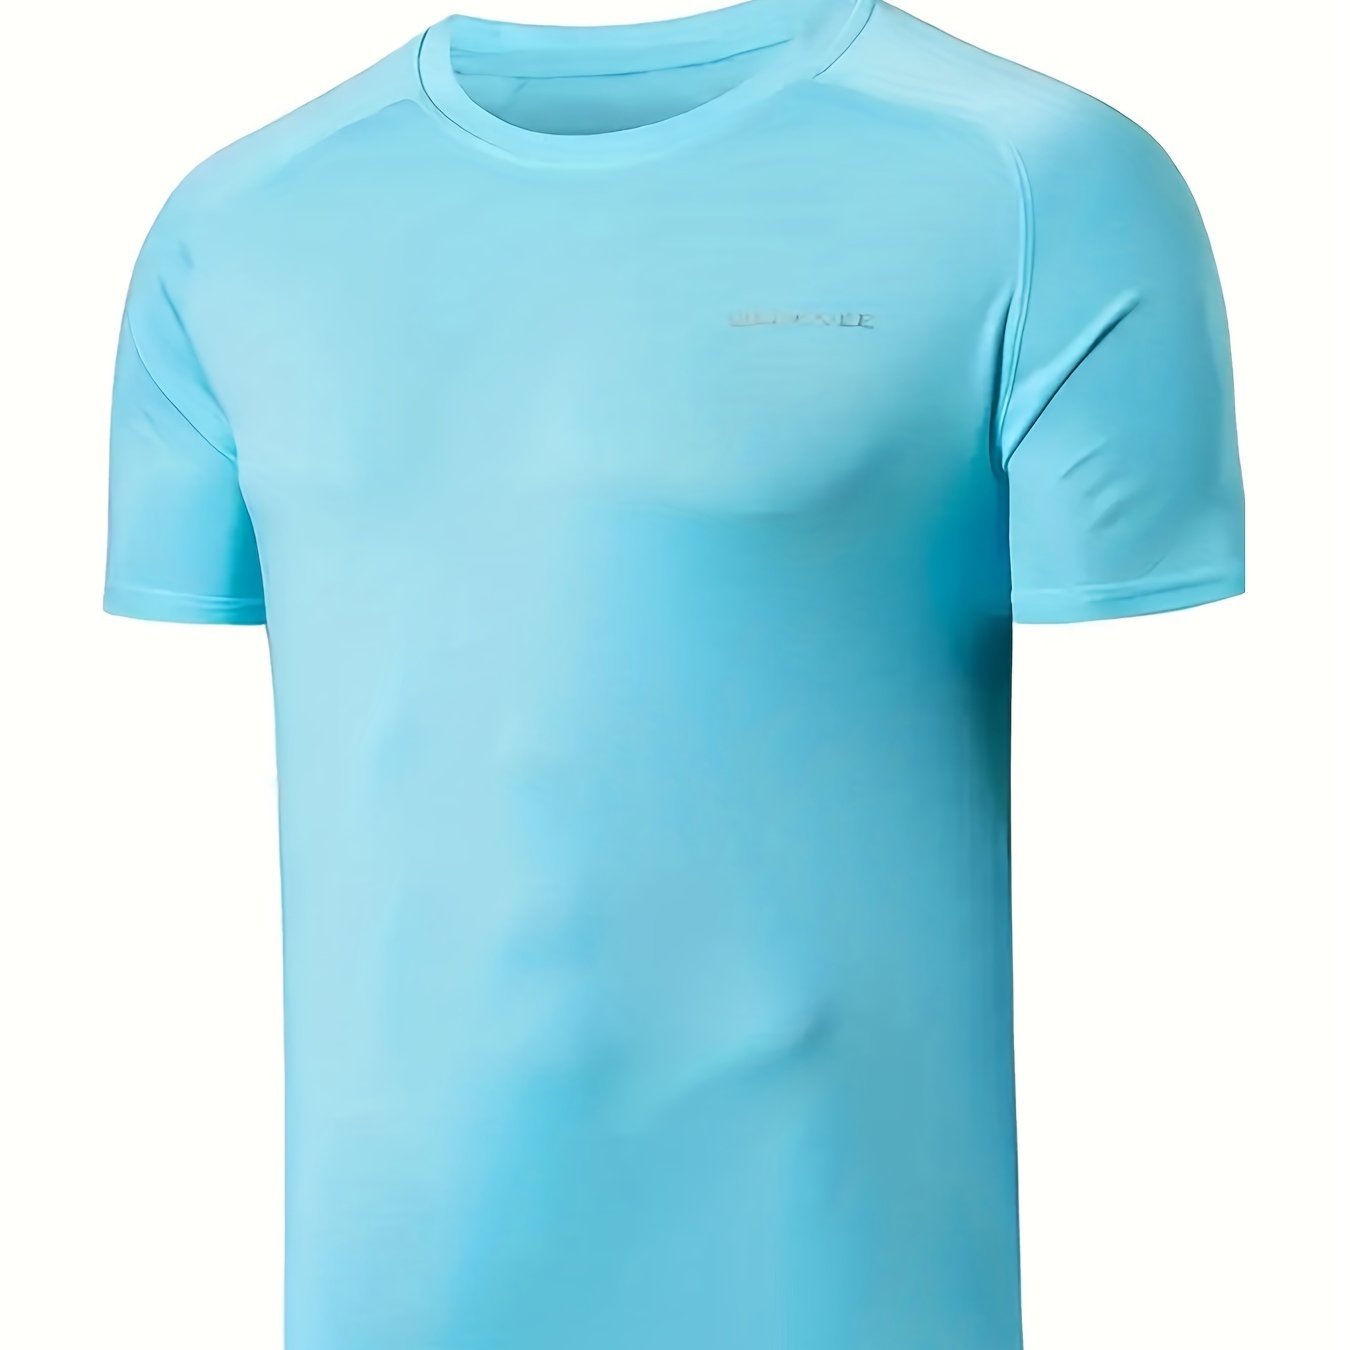 Men's UPF 50+ Sun Protection Shirt with Assorted Colors, Swim Shirt Quick Dry Fishing Beach T Shirts Moisture Wicking Outdoor Active Sports Shirt